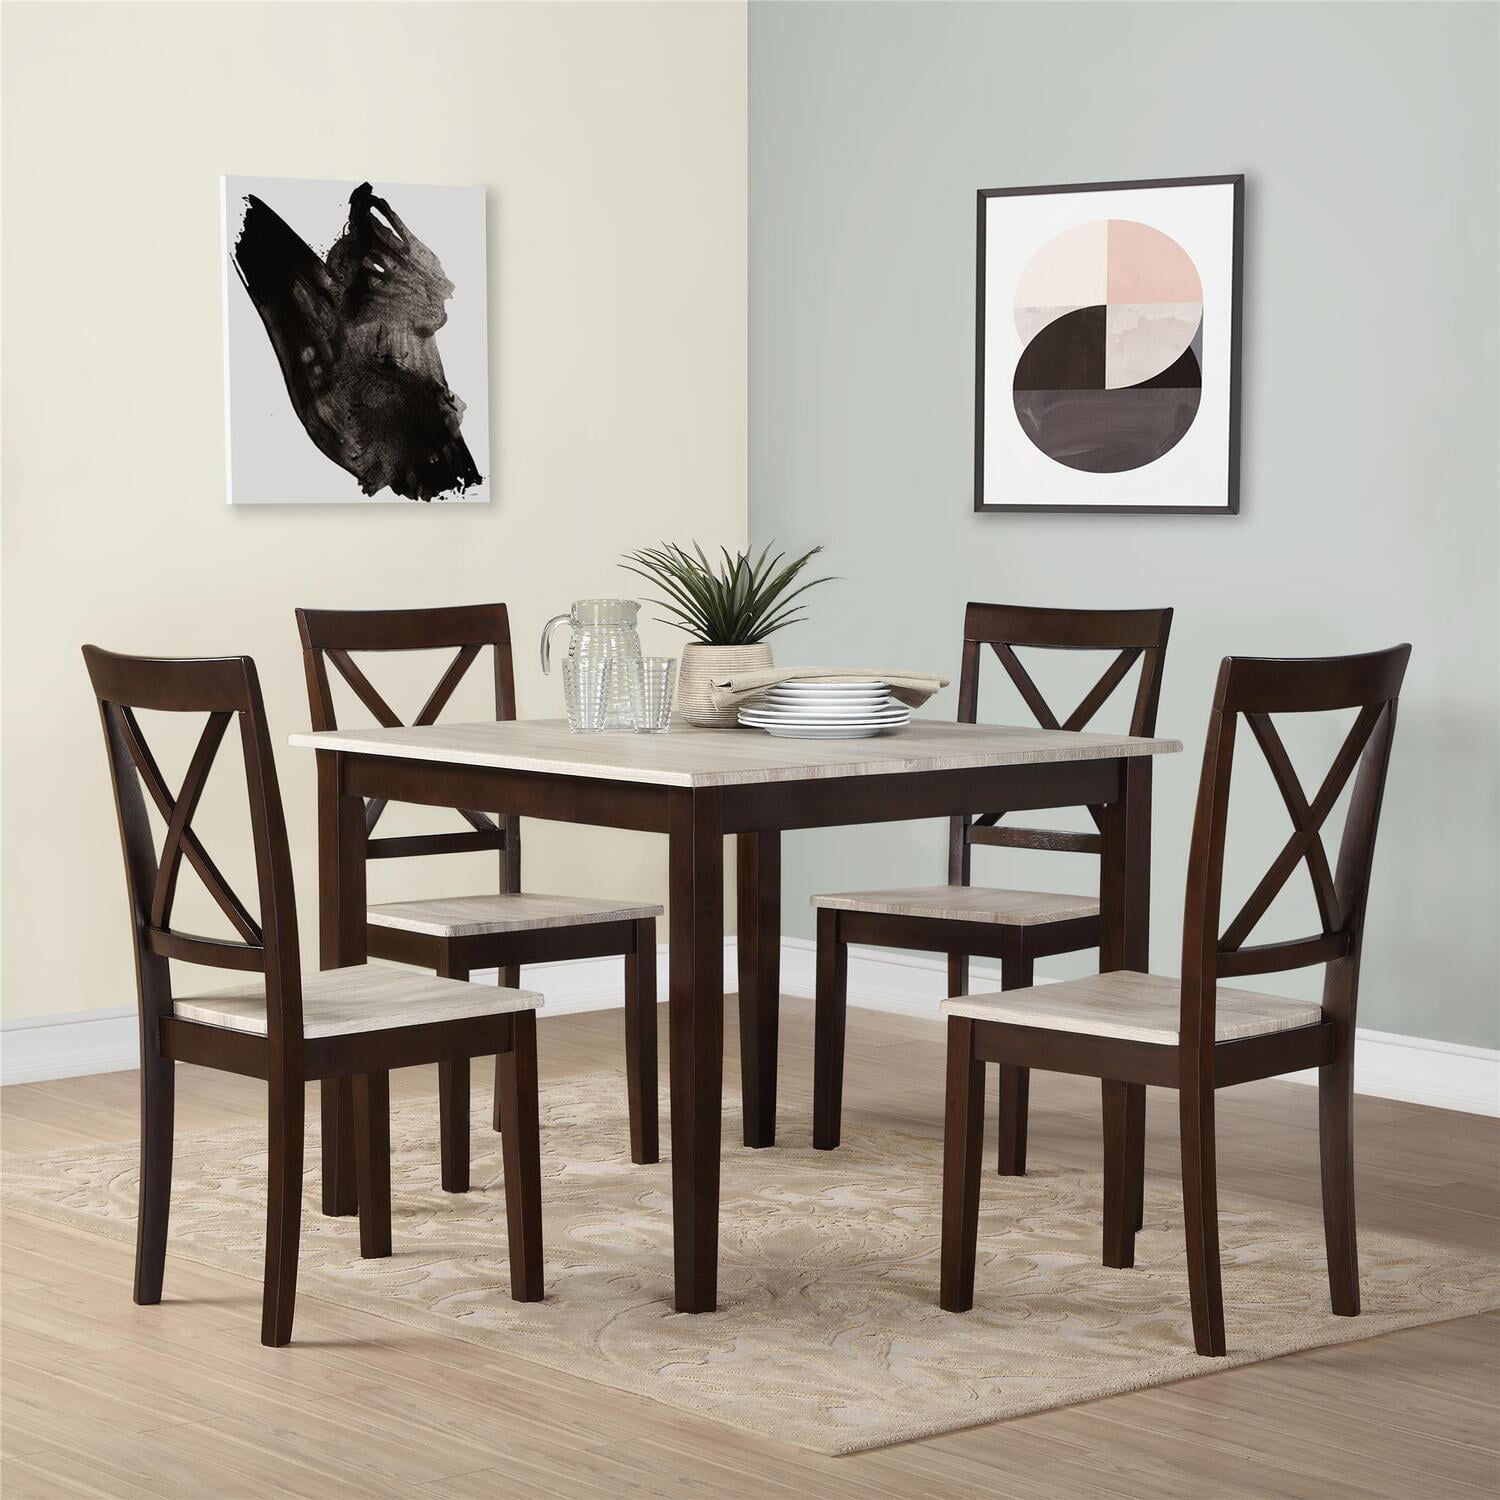 the dining set